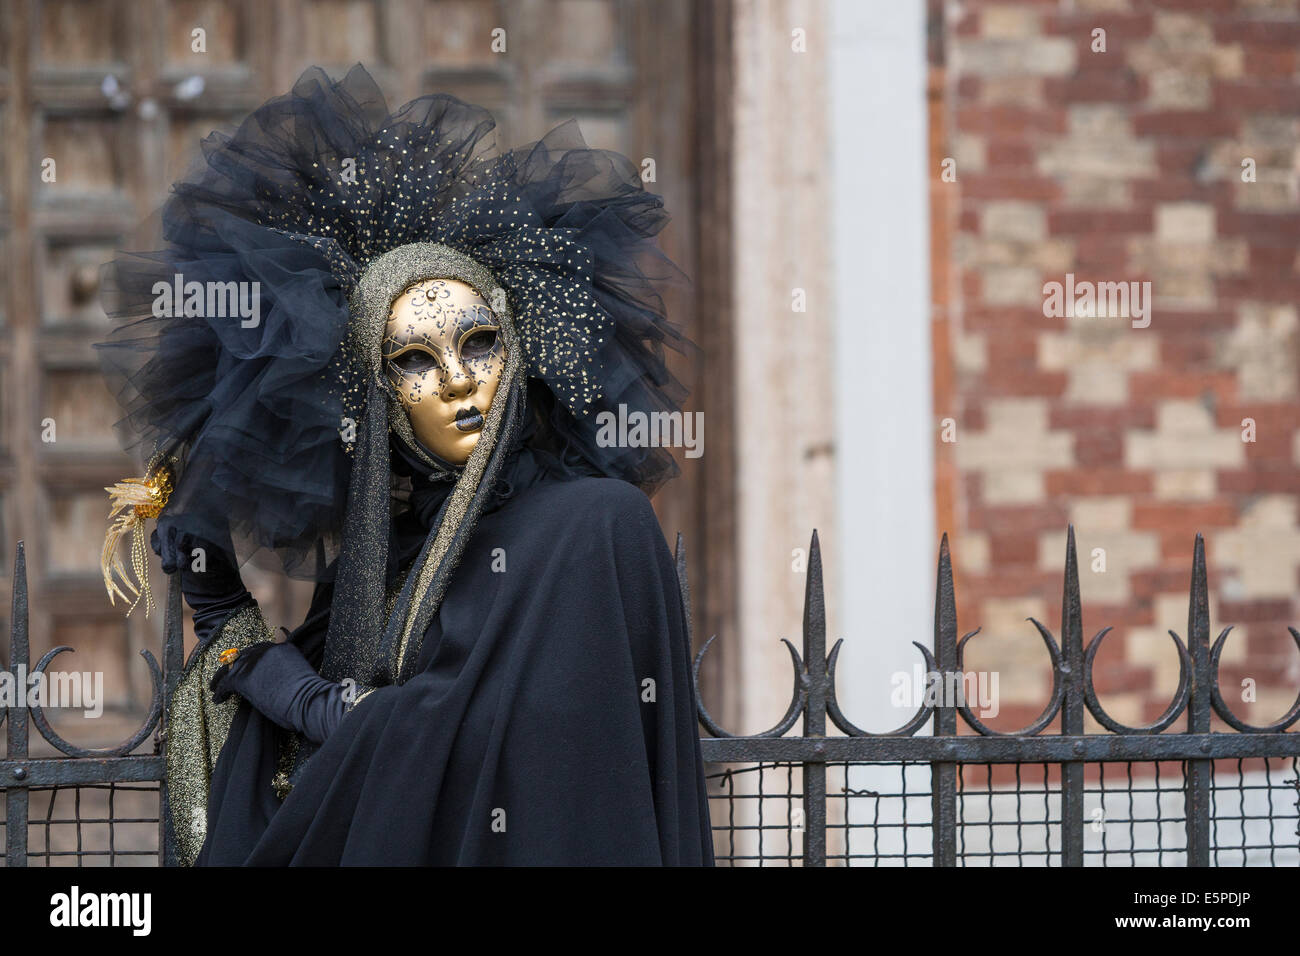 Woman in black costume with gold and lace headdress by San Zaccaria Church during Carnival in Venice. Stock Photo